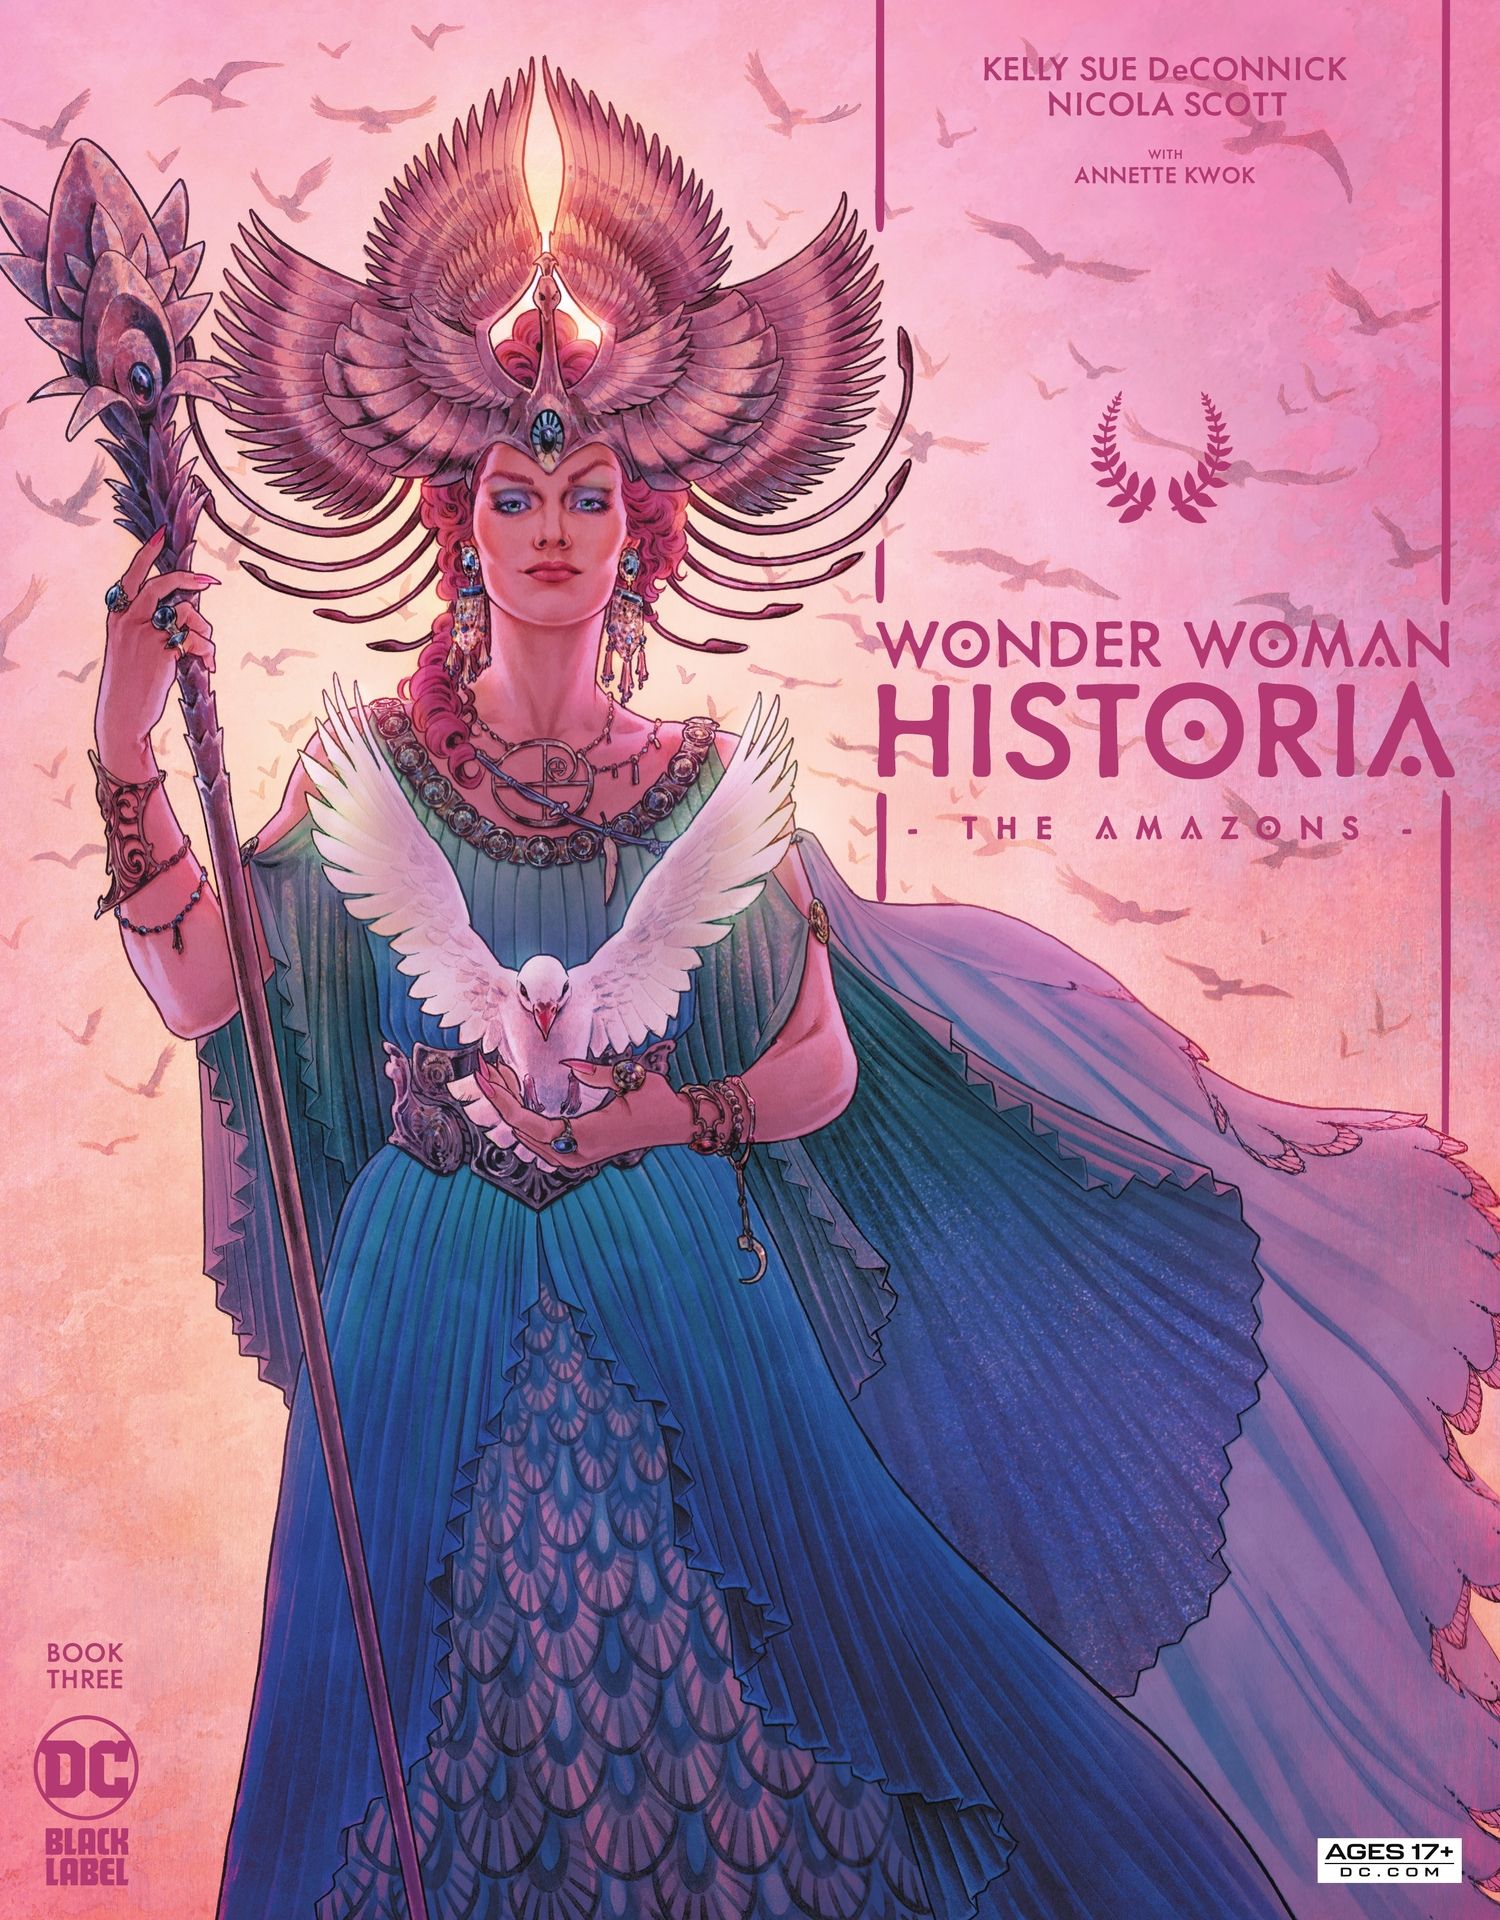 Read online Wonder Woman Historia: The Amazons comic -  Issue #3 - 1